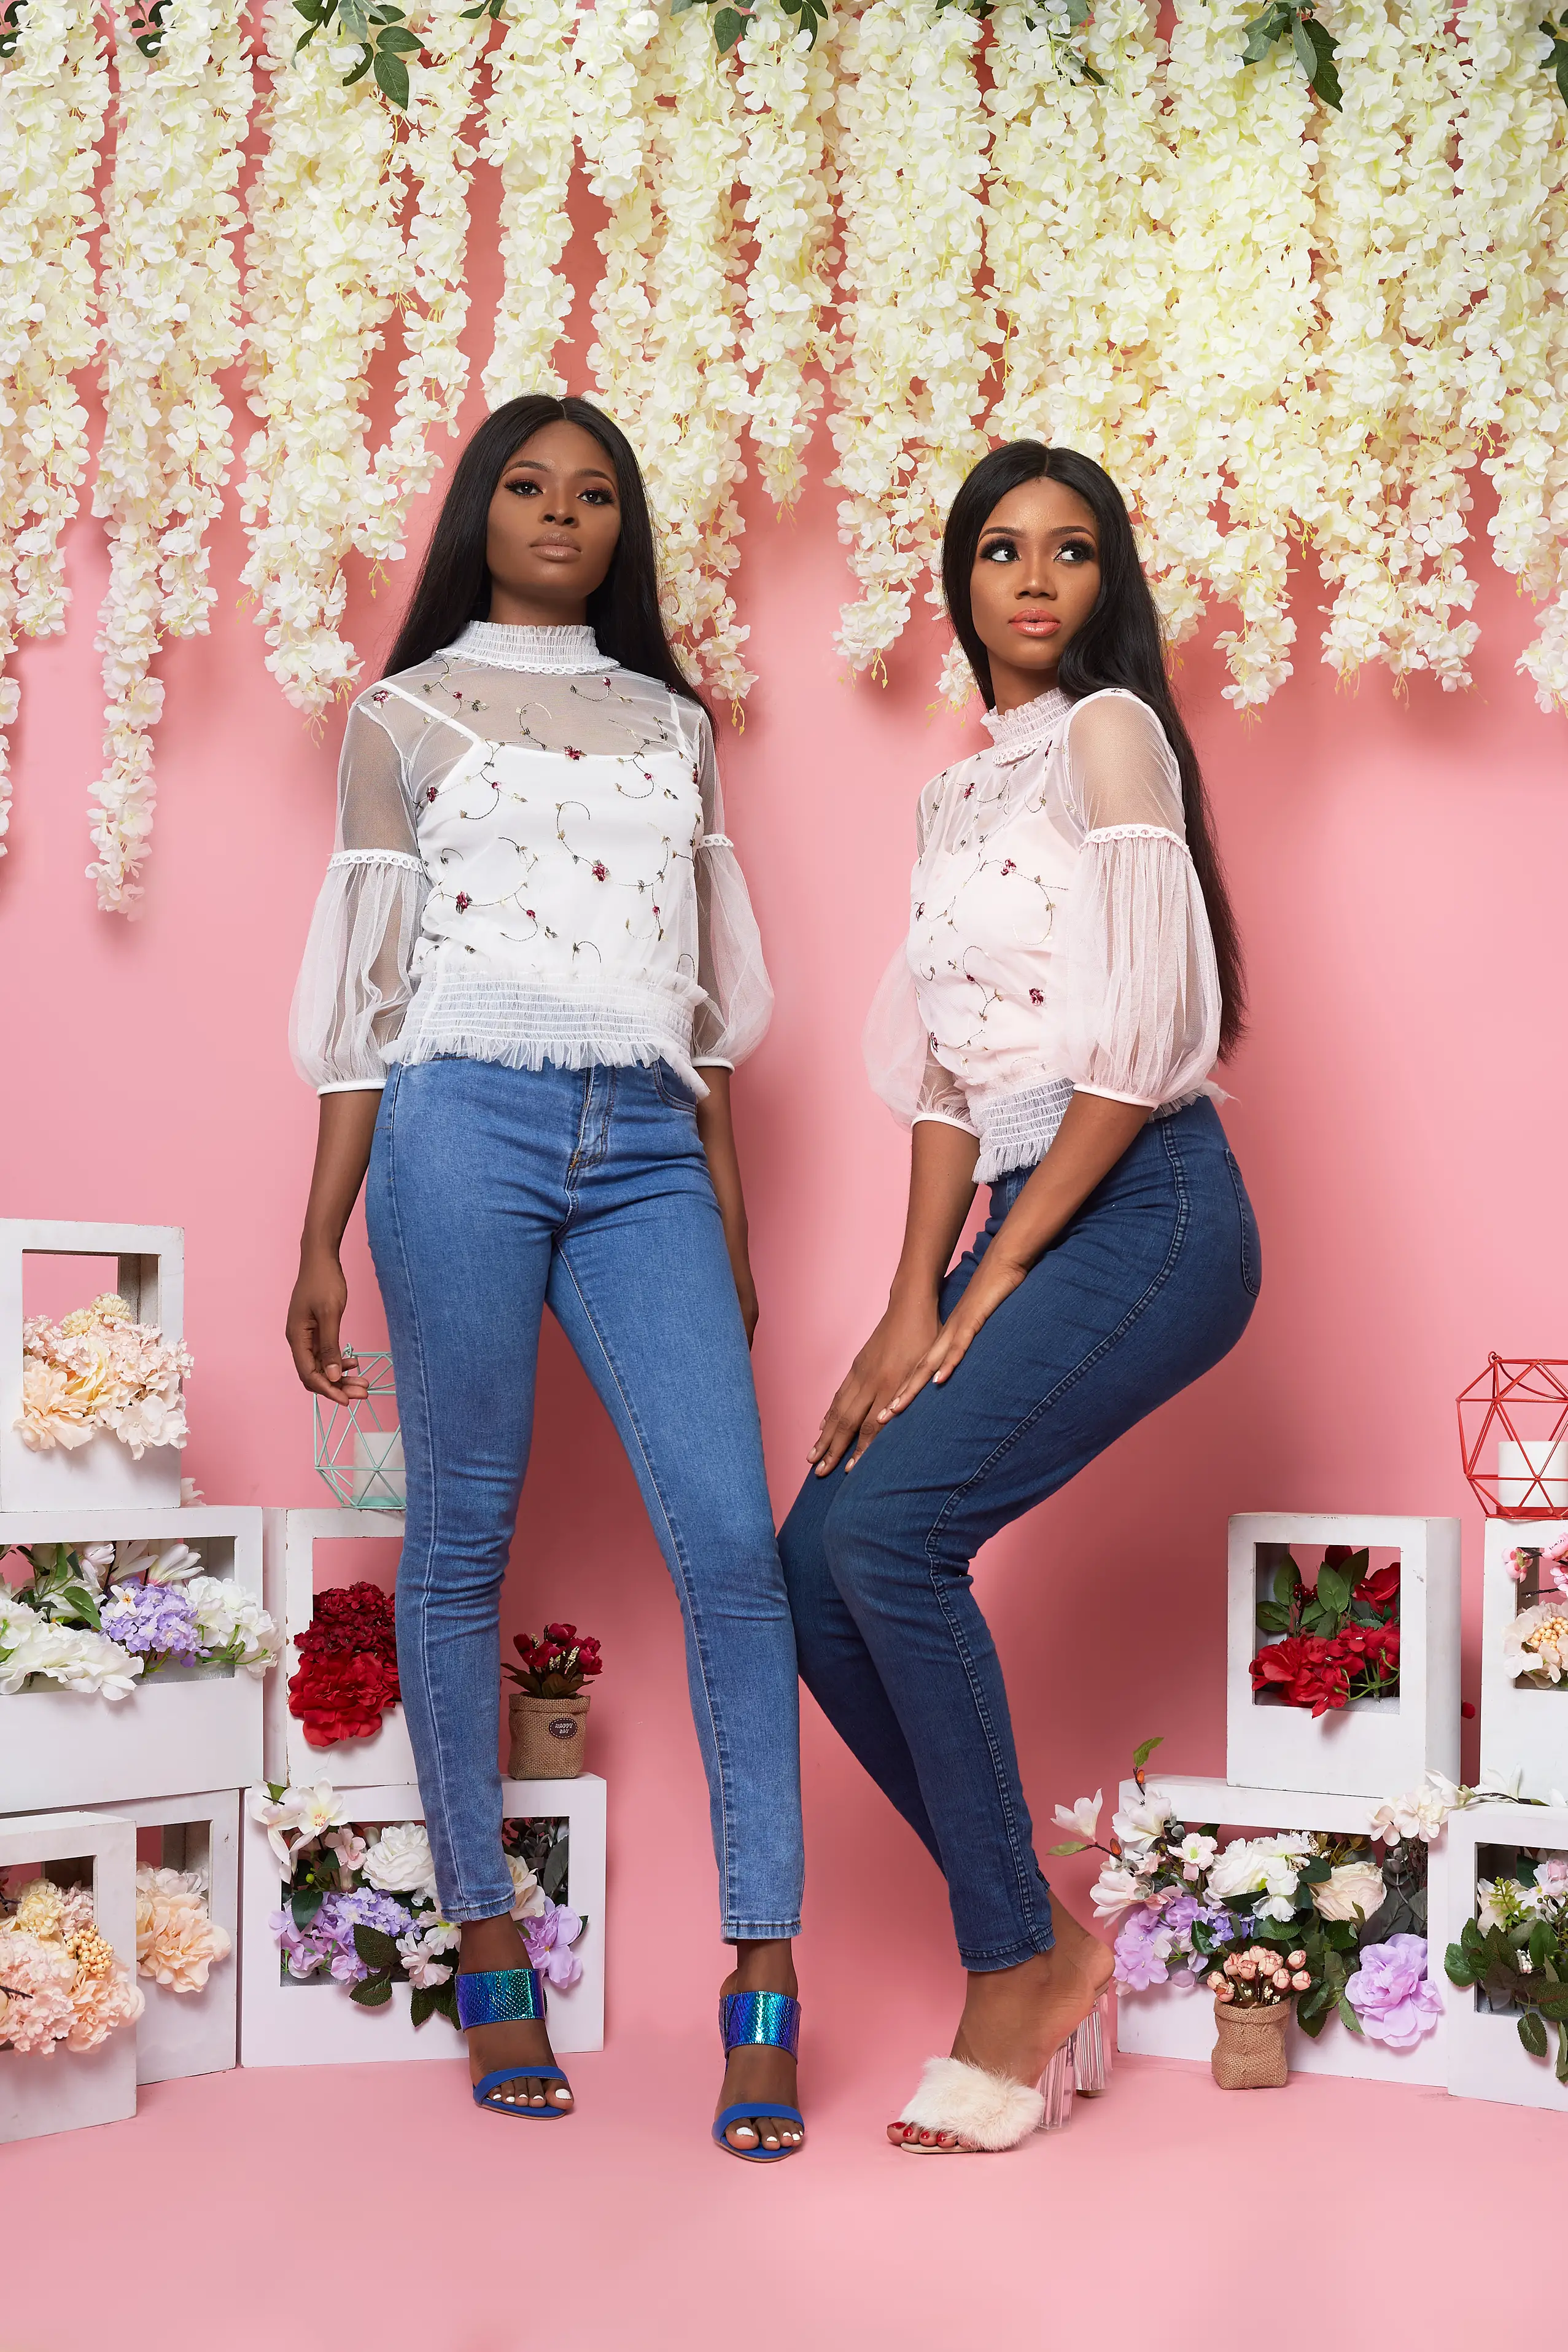 Nigerian Fashion Brand RHB Releases it's New Collection For The Stylish Woman